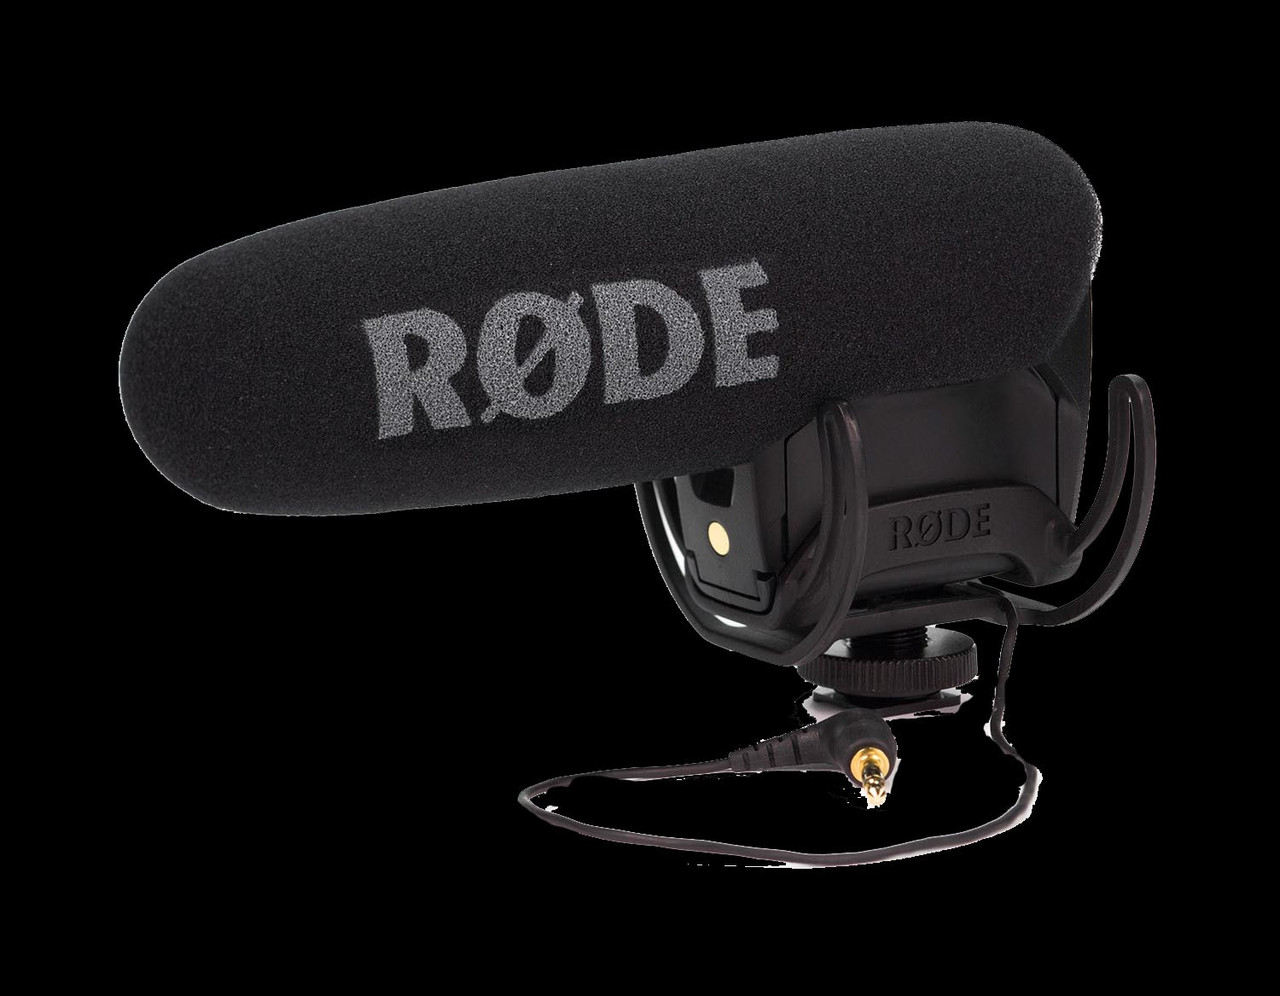 Rode Videomic Pro Compact Directional On-camera Microphone